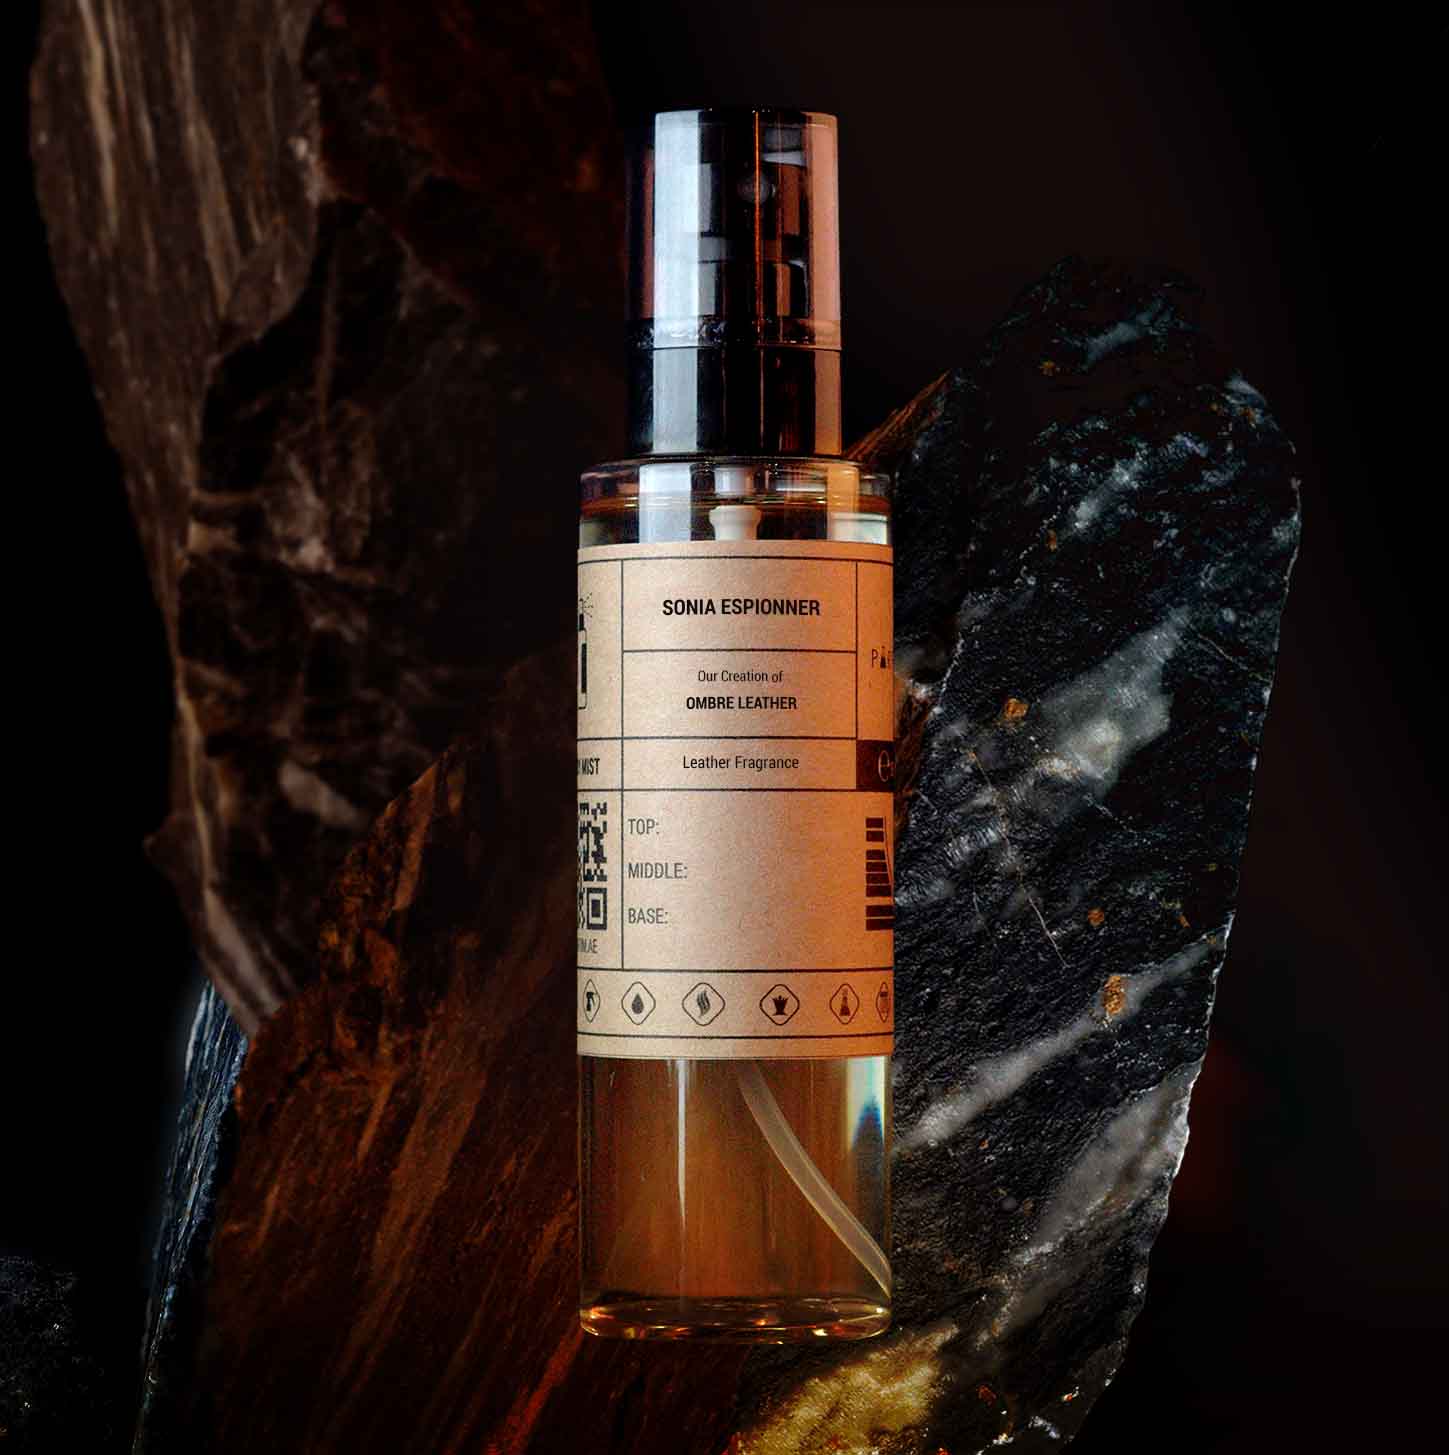 TF's Ombre Leather Body Mist